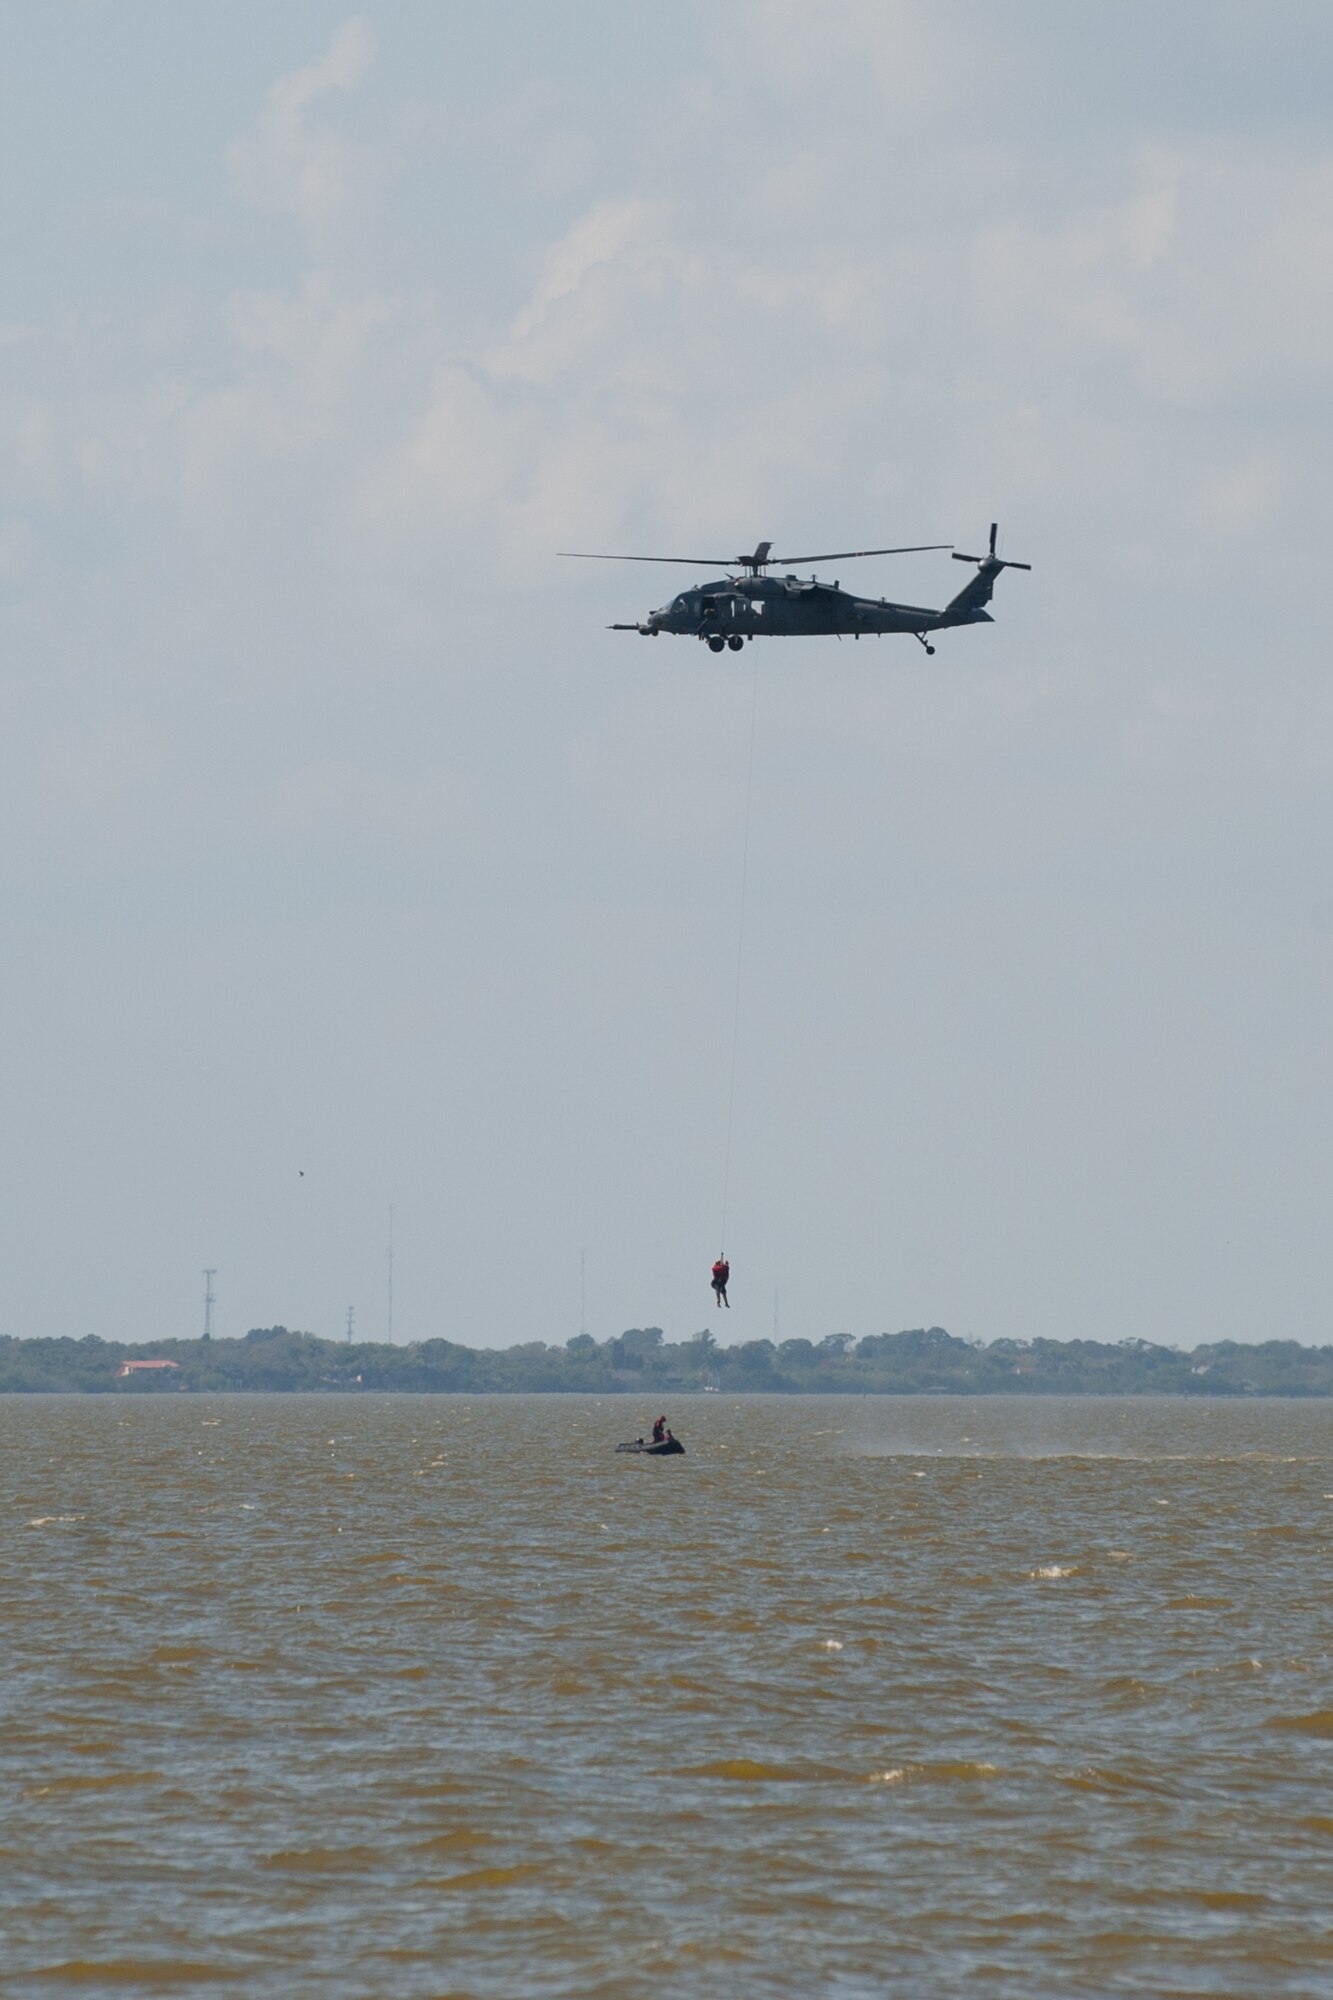 The 45th Operations Group's Detachment 3 and the 920th Rescue Wing held an astronaut recovery demonstration March 14, 2016, along the Banana River, west of Patrick Air Force Base, Fla. The demonstration involved Air Force Guardian Angel Airmen and aircraft of the 920th Rescue Wing to showcase aspects of safe rescue operations. Airmen from Detachment 3 coordinate astronaut capsule rescue and recovery and train personnel worldwide to ensure the Department of Defense is ready to support NASA's human space endeavors. (U.S. Air Force photo by Benjamin Thacker/Released)